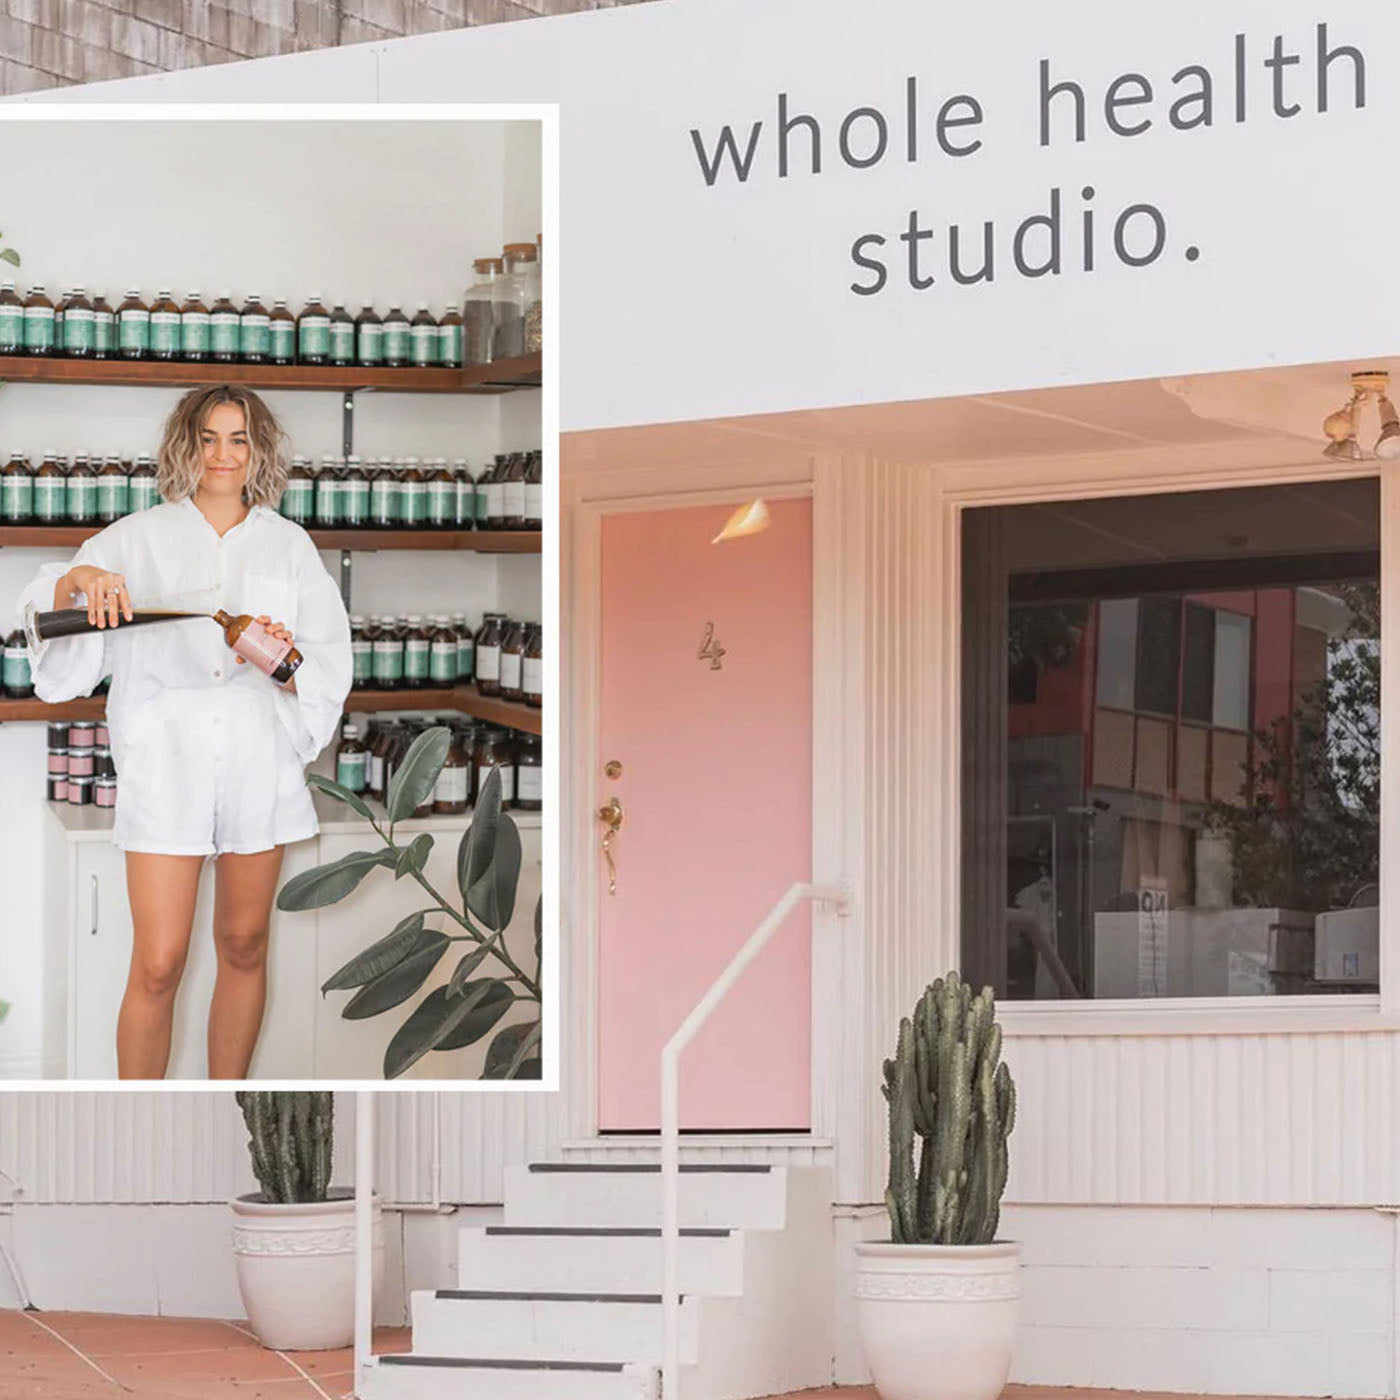 An interview with Whole Health Studio